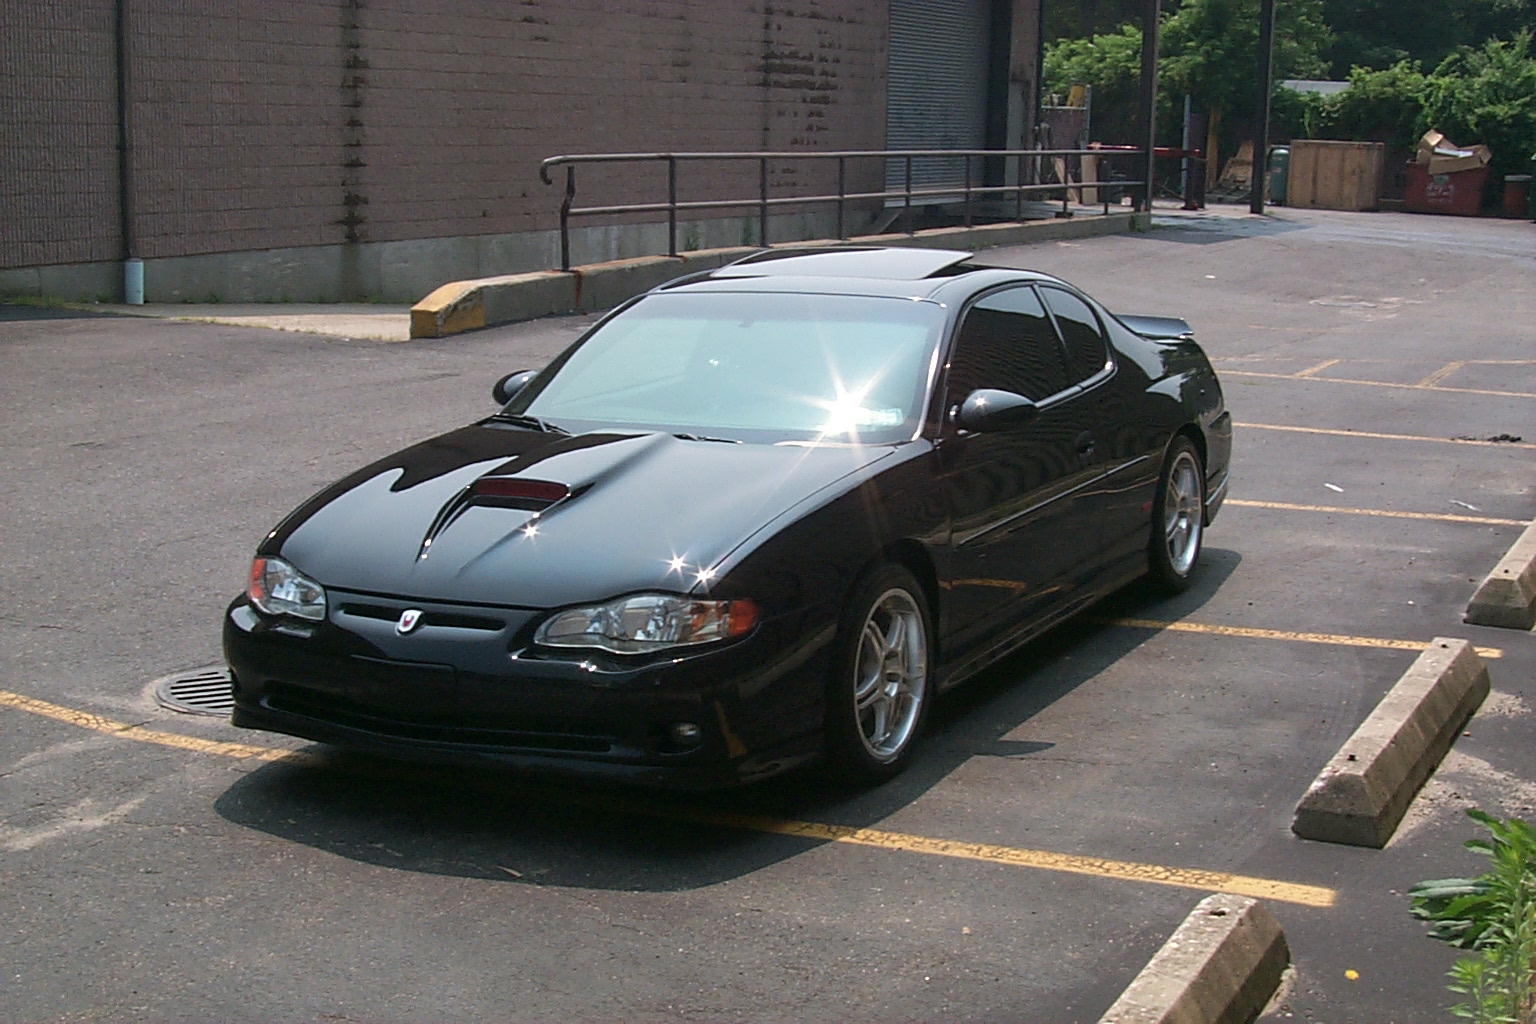  2002 Chevrolet Monte Carlo SS Supercharger